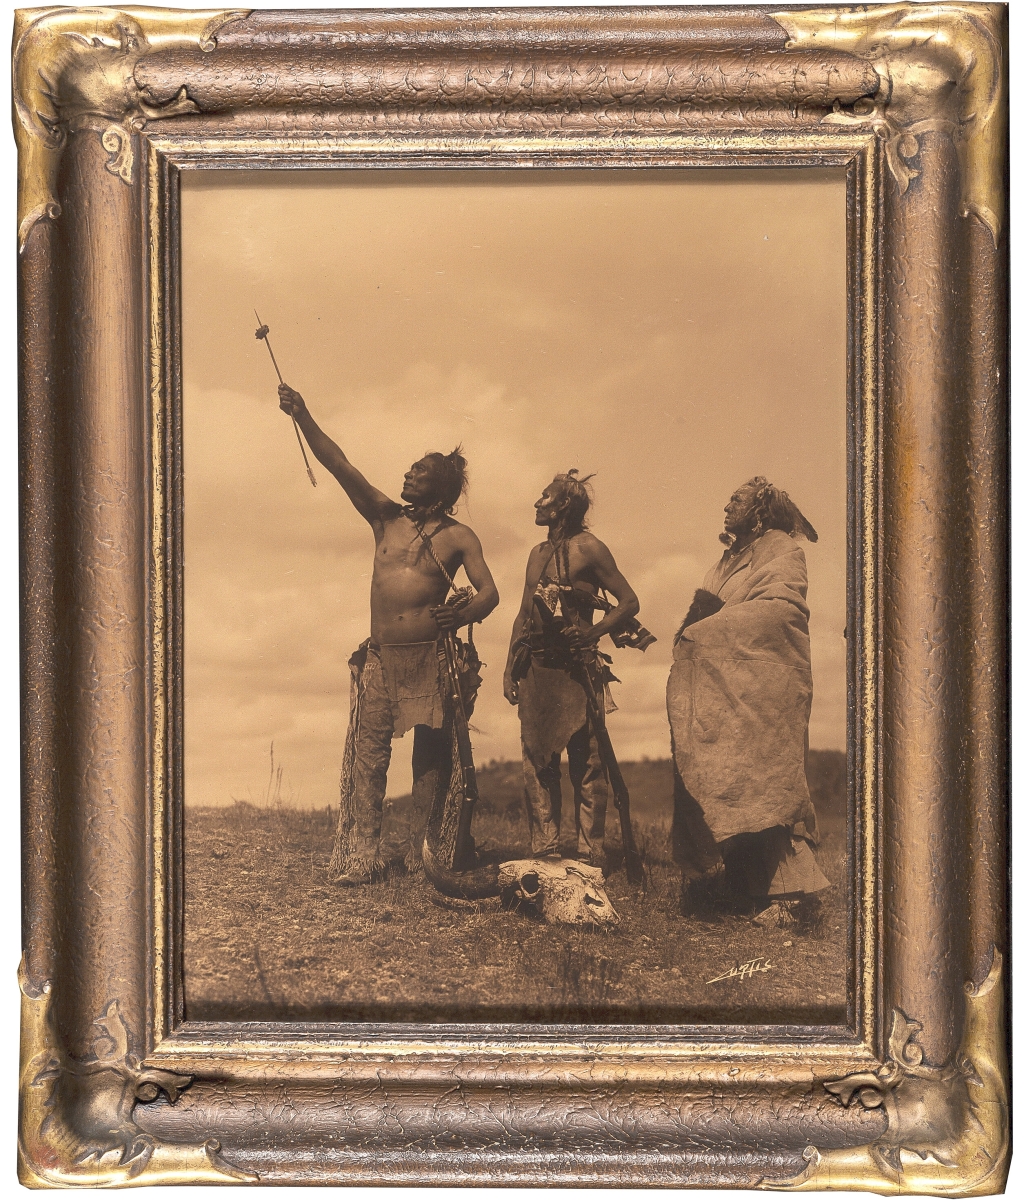 An orotone by Edward Curtis, “The Oath, Apsaroke,” measured 11 by 14 inches and sold for $30,000.